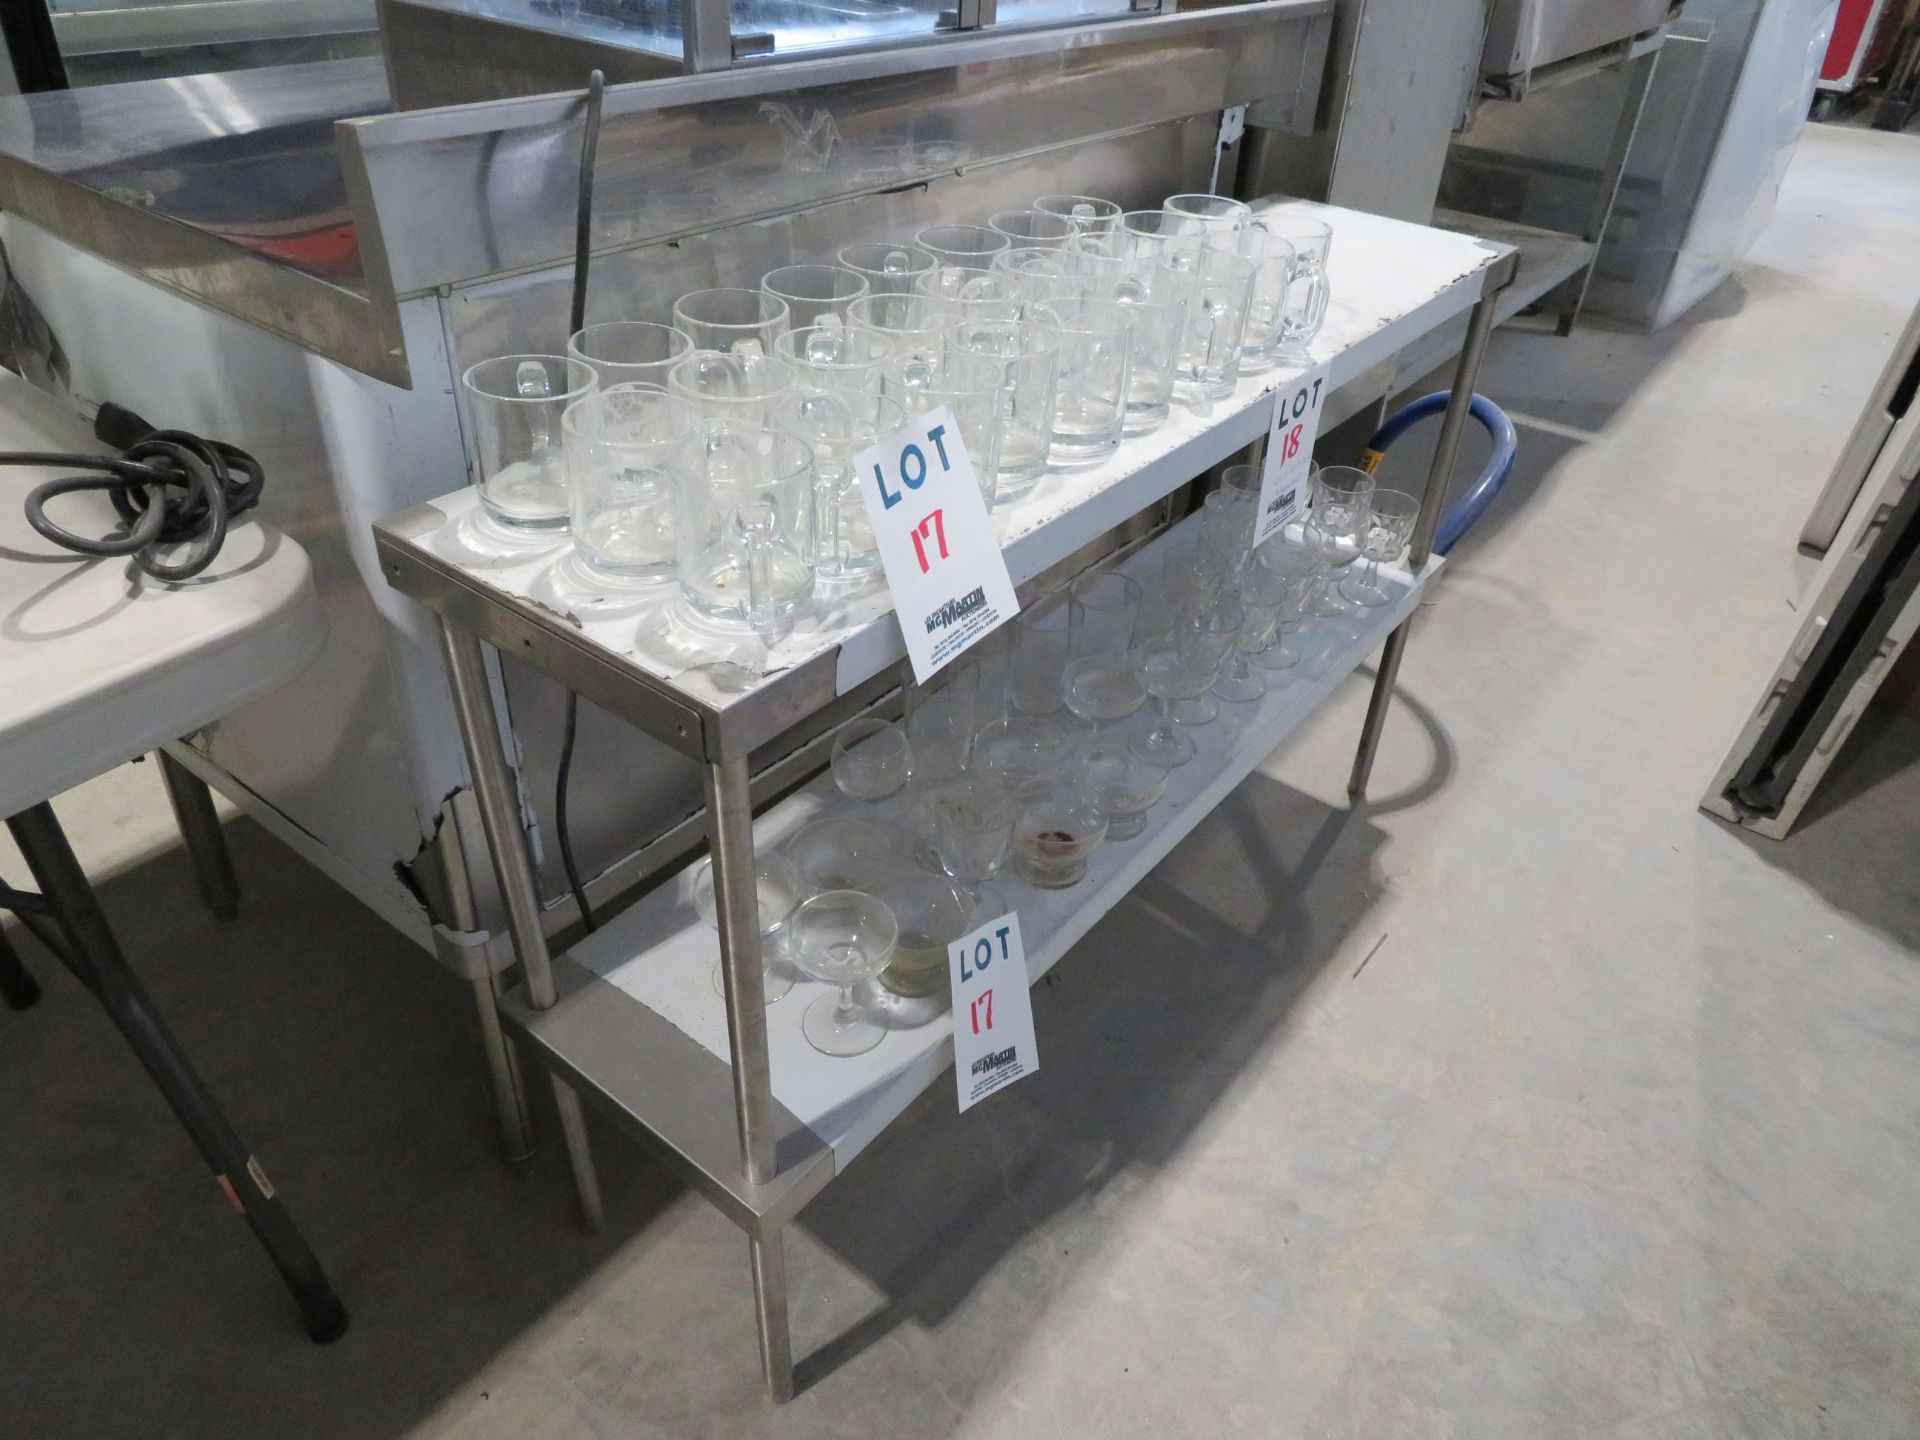 Stainless steel shelf/table approx. 48'w x 12"d x 30"h